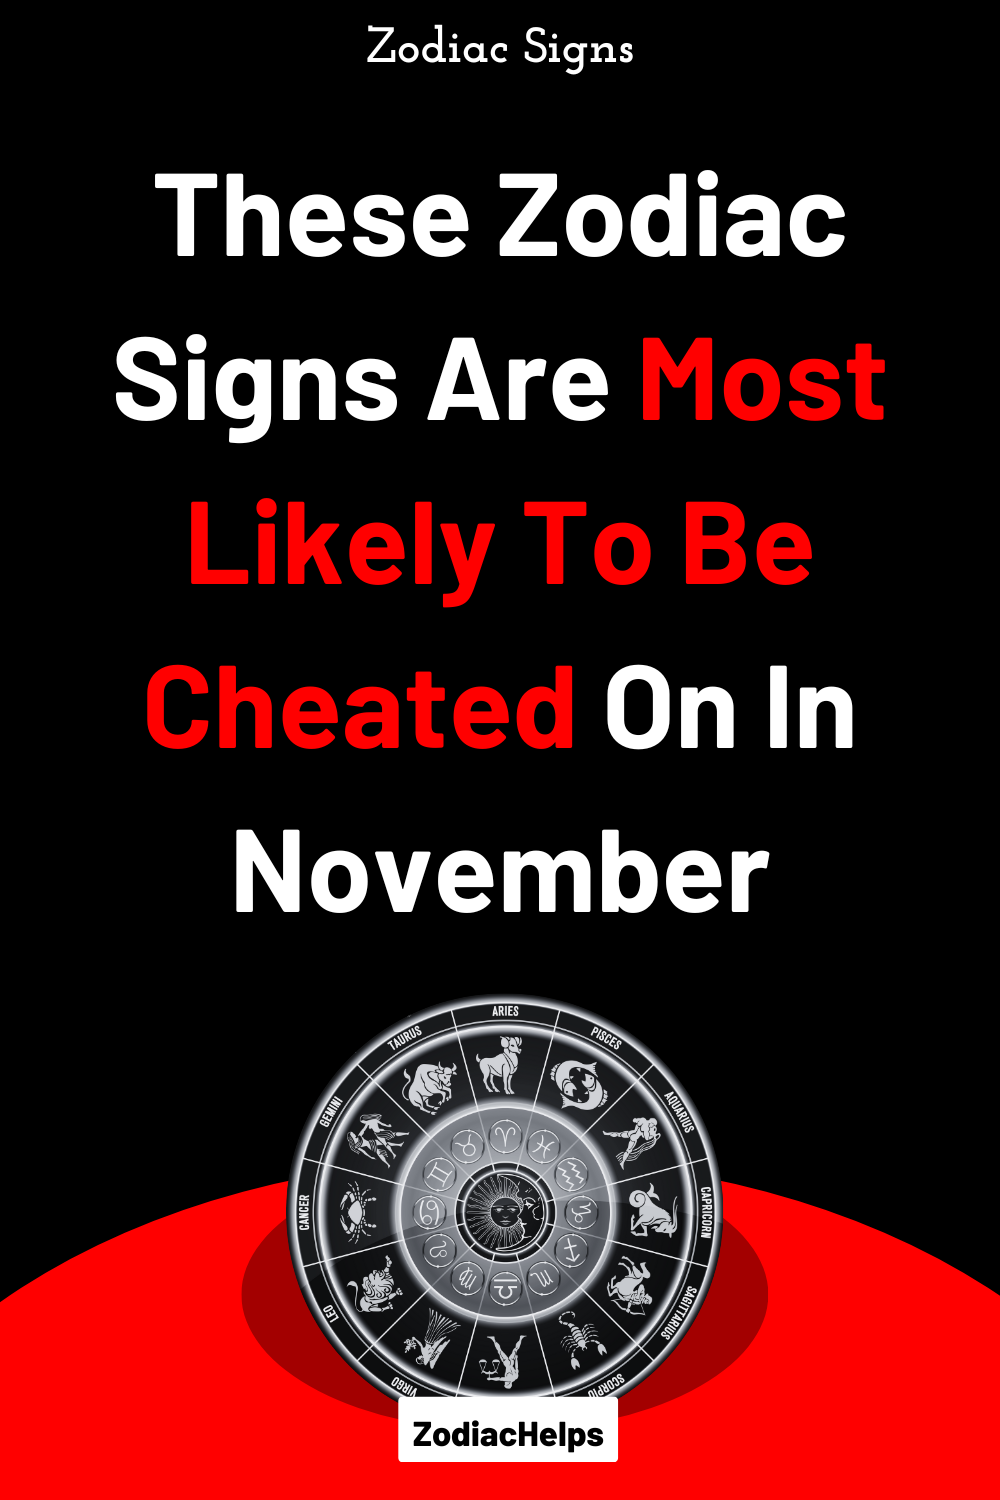 These Zodiac Signs Are Most Likely To Be Cheated On In November